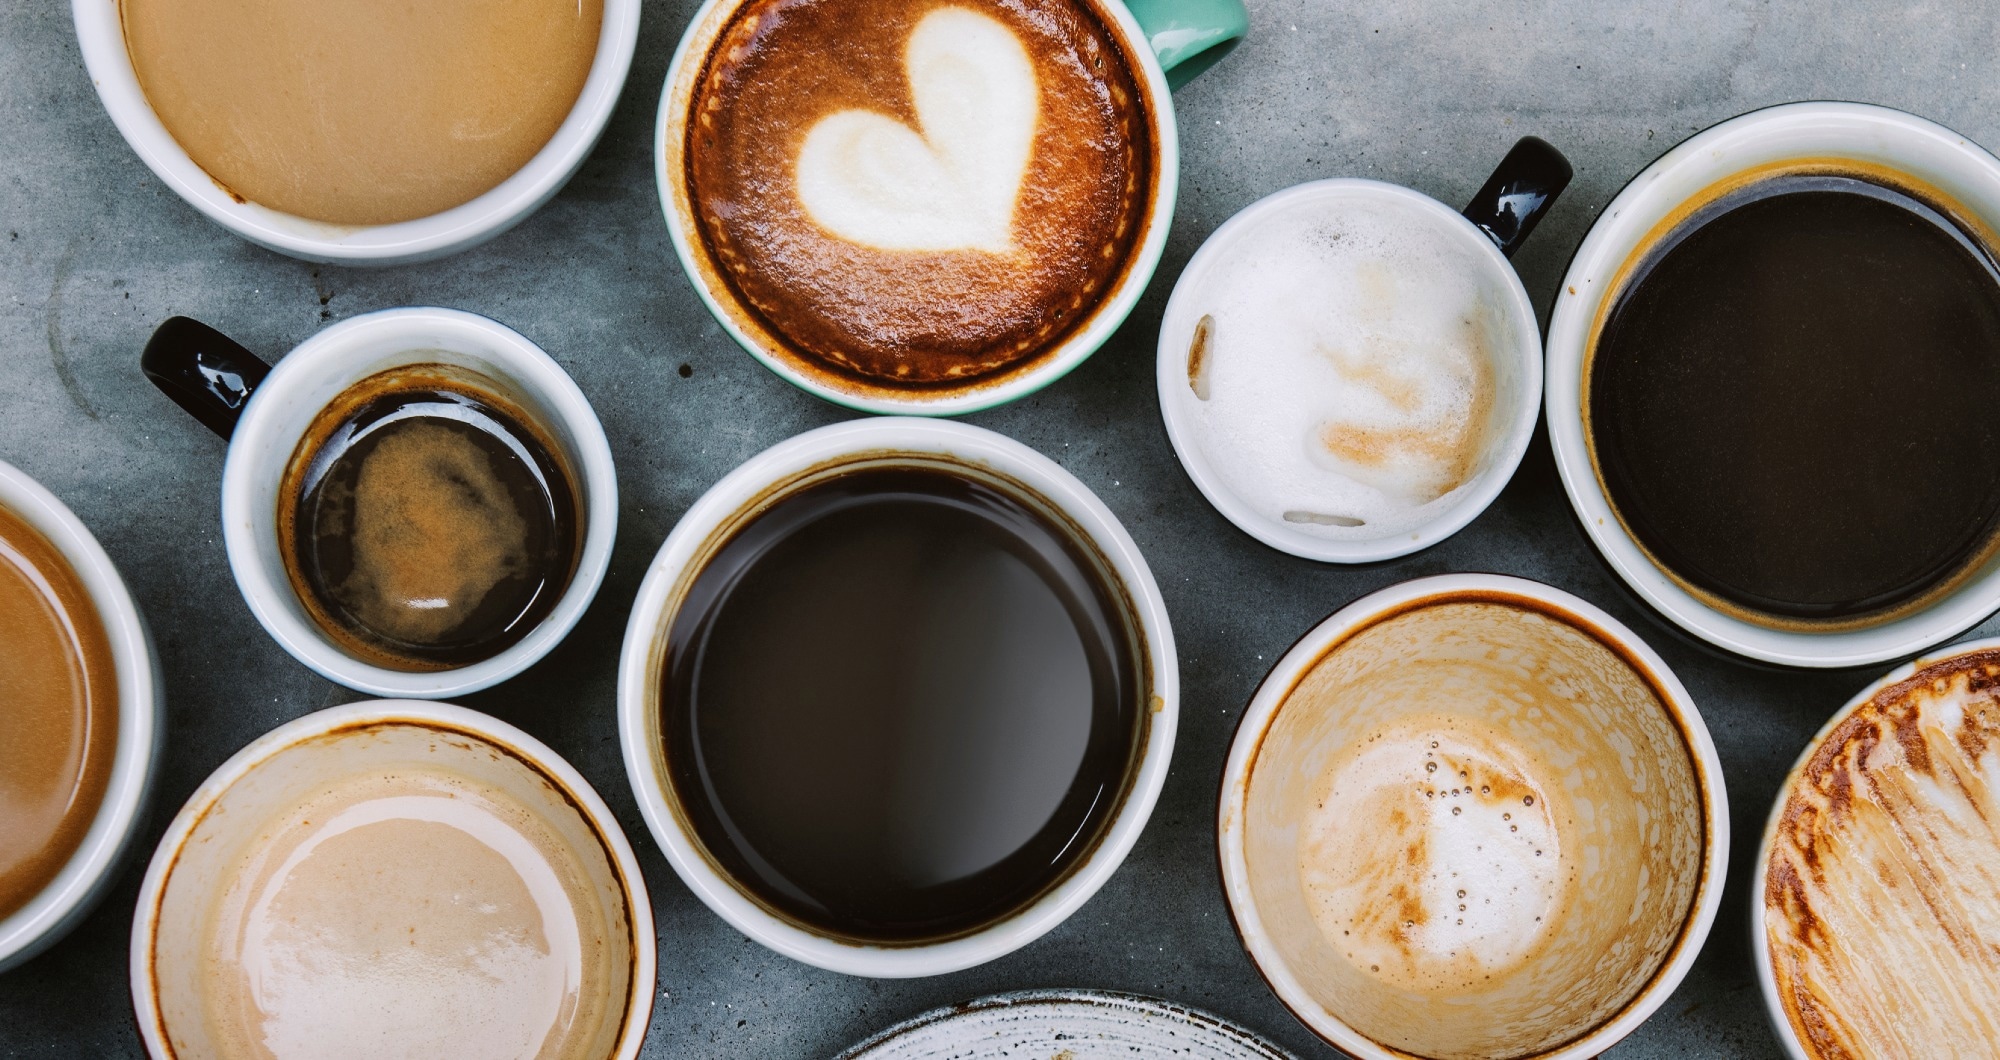 Study: The impact of coffee subtypes on incident cardiovascular disease, arrhythmias, and mortality: long-term outcomes from the UK Biobank. Image Credit: Rawpixel.com/Shutterstock